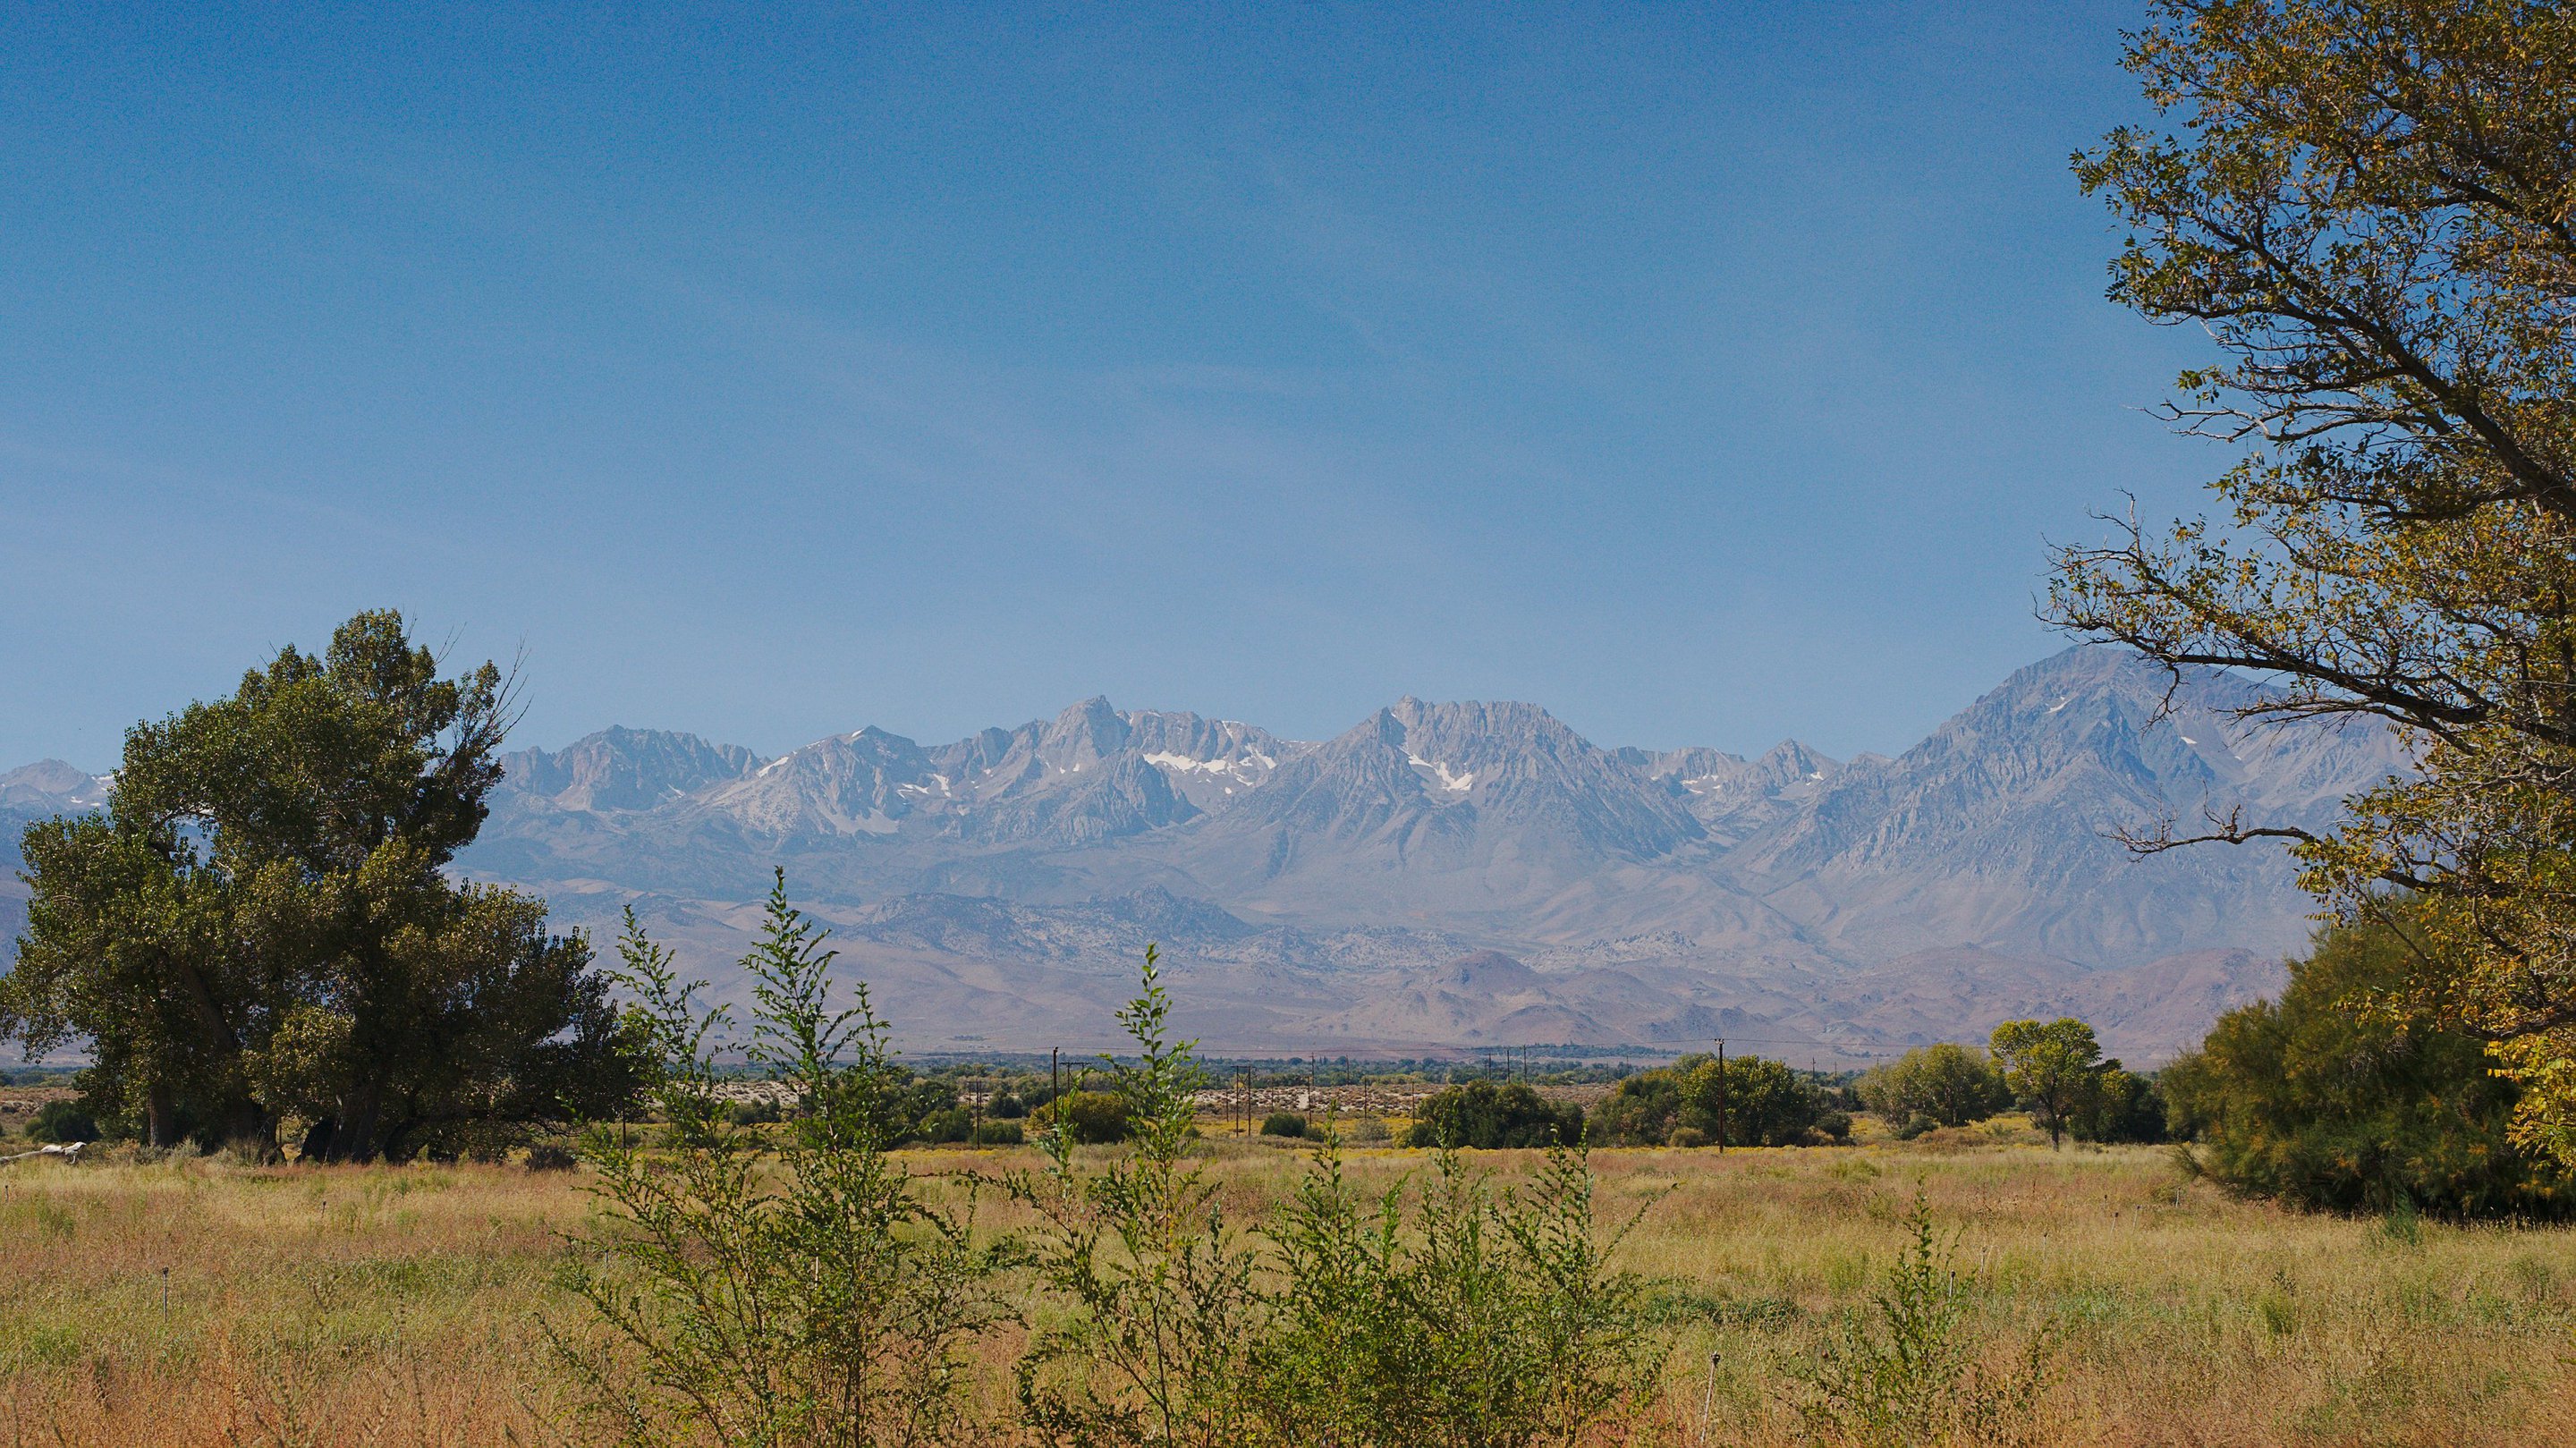 The High Sierrra photographed by luxagraf